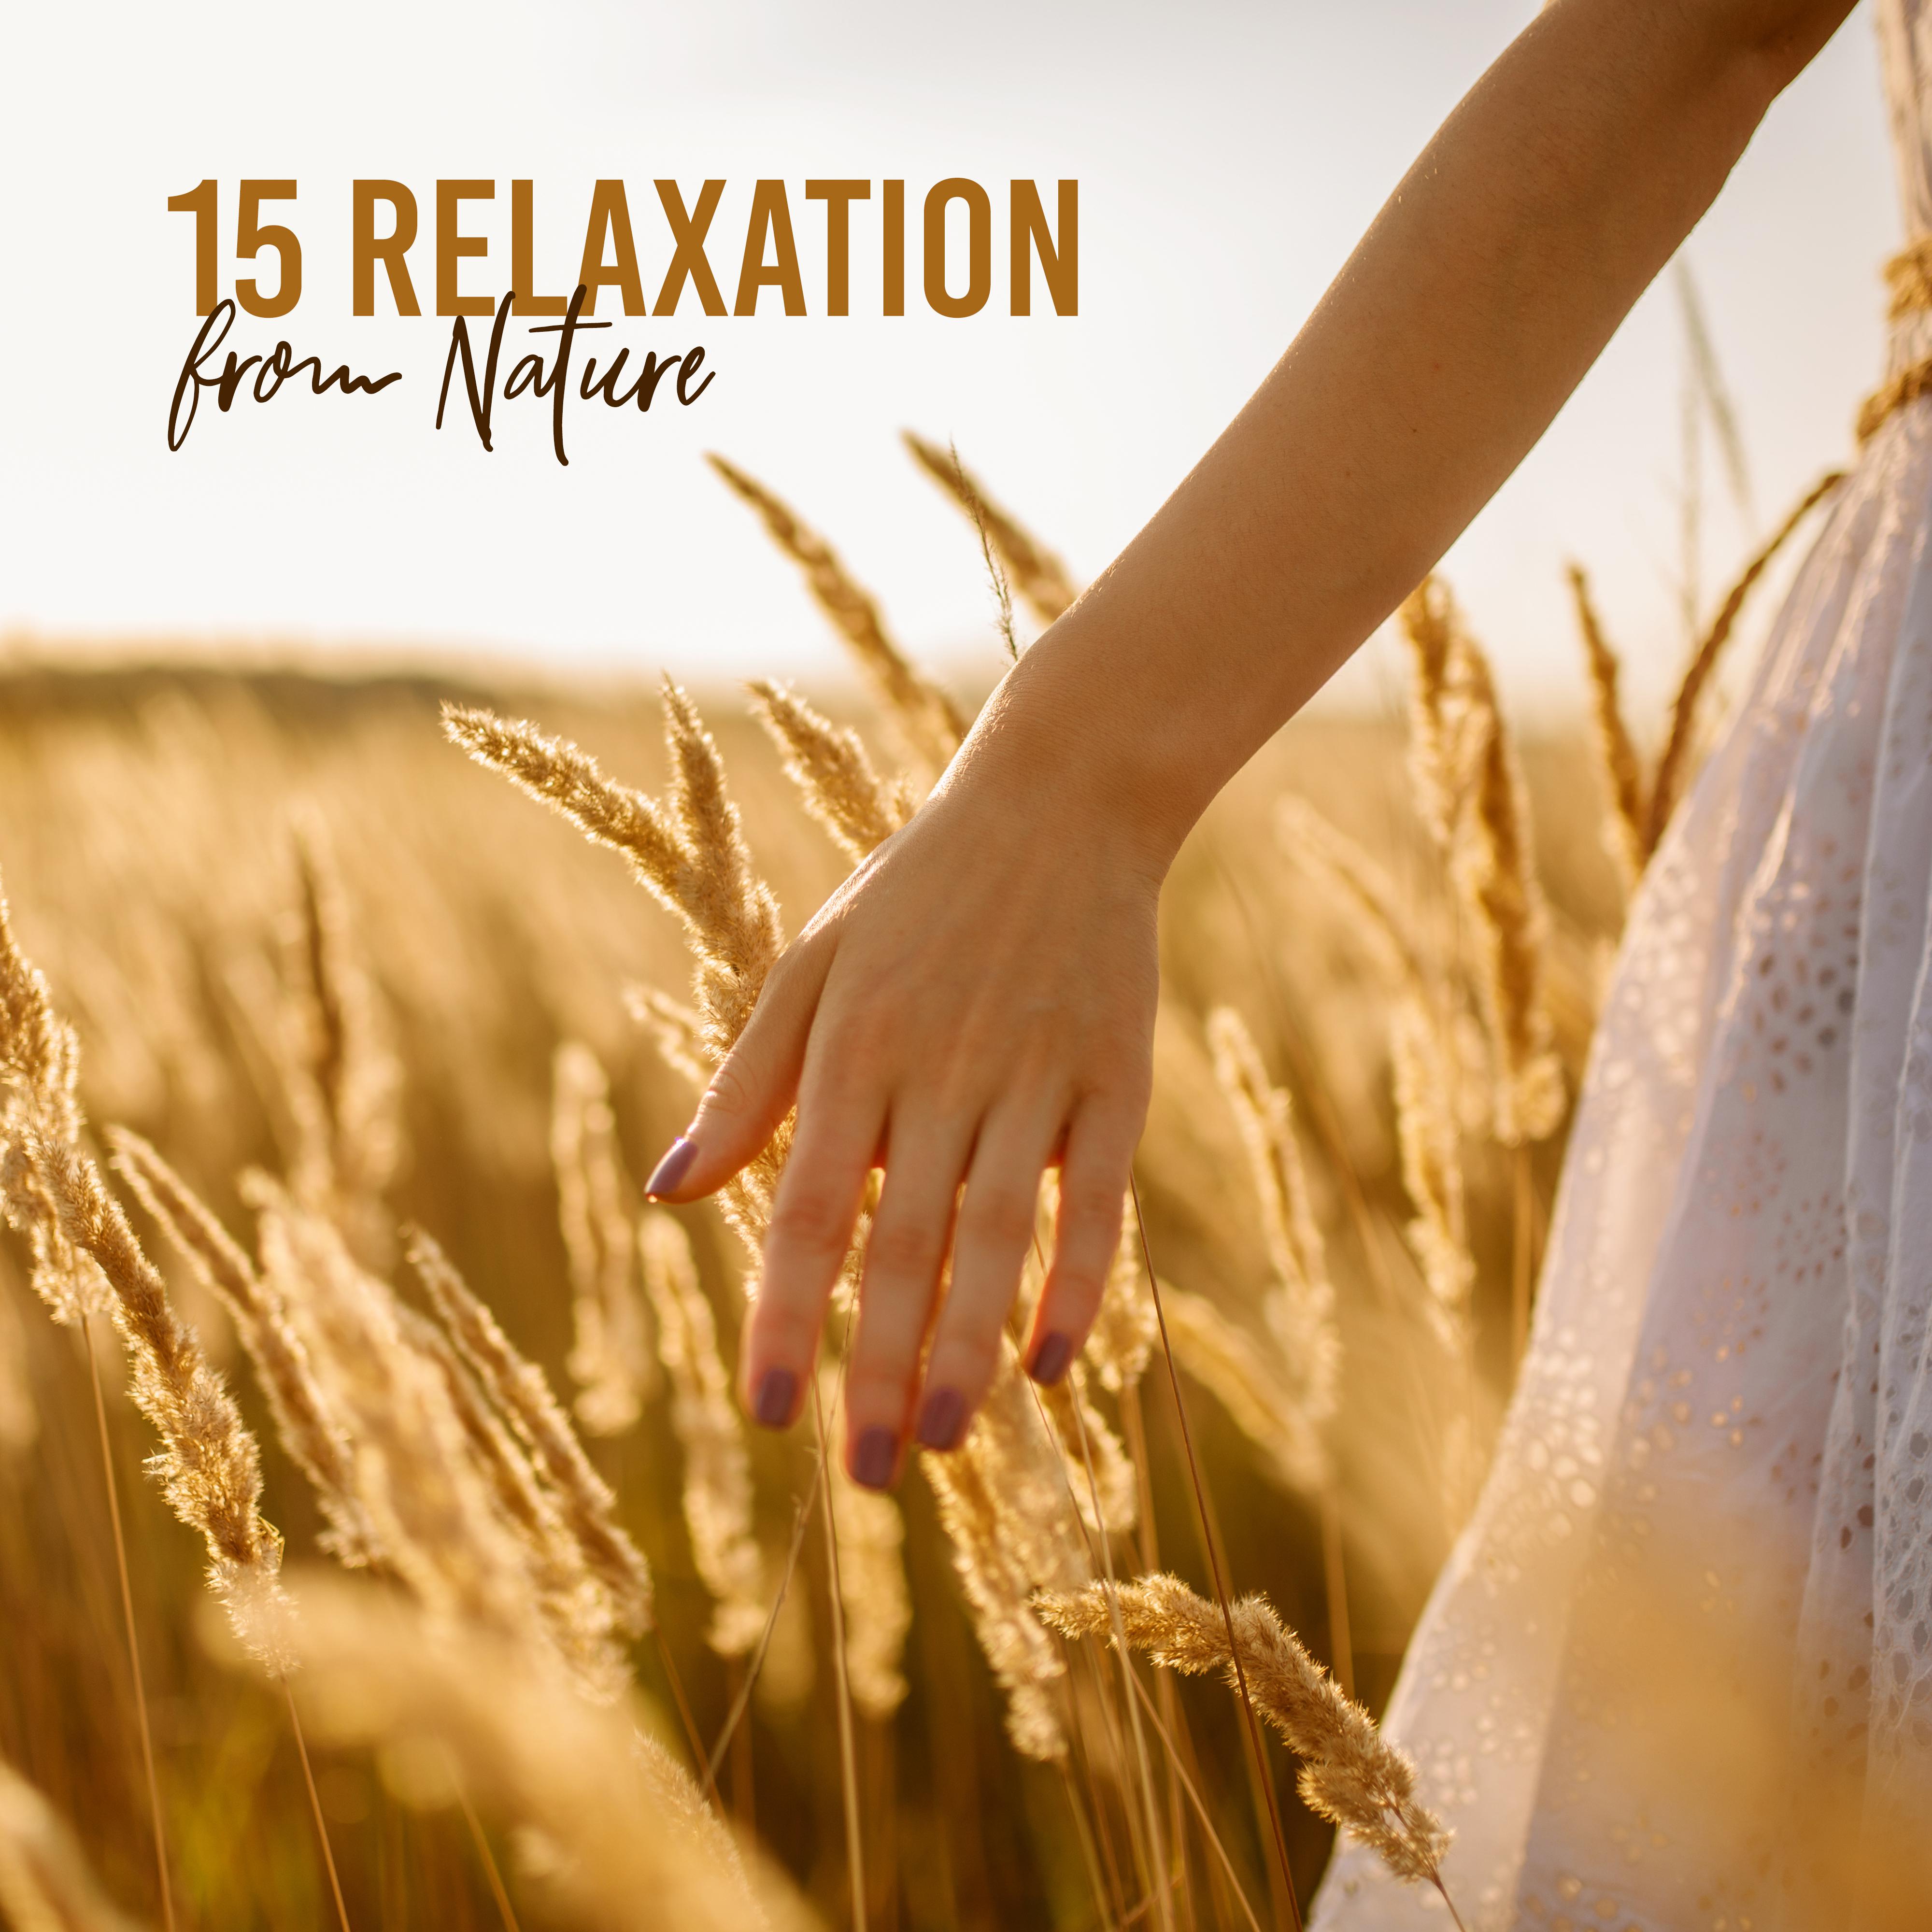 15 Relaxation from Nature – Soothing Sounds for Sleep, Meditation, Rest, Nature Music, Reduce Stress, Pure Zen, Music Therapy, New Age Music